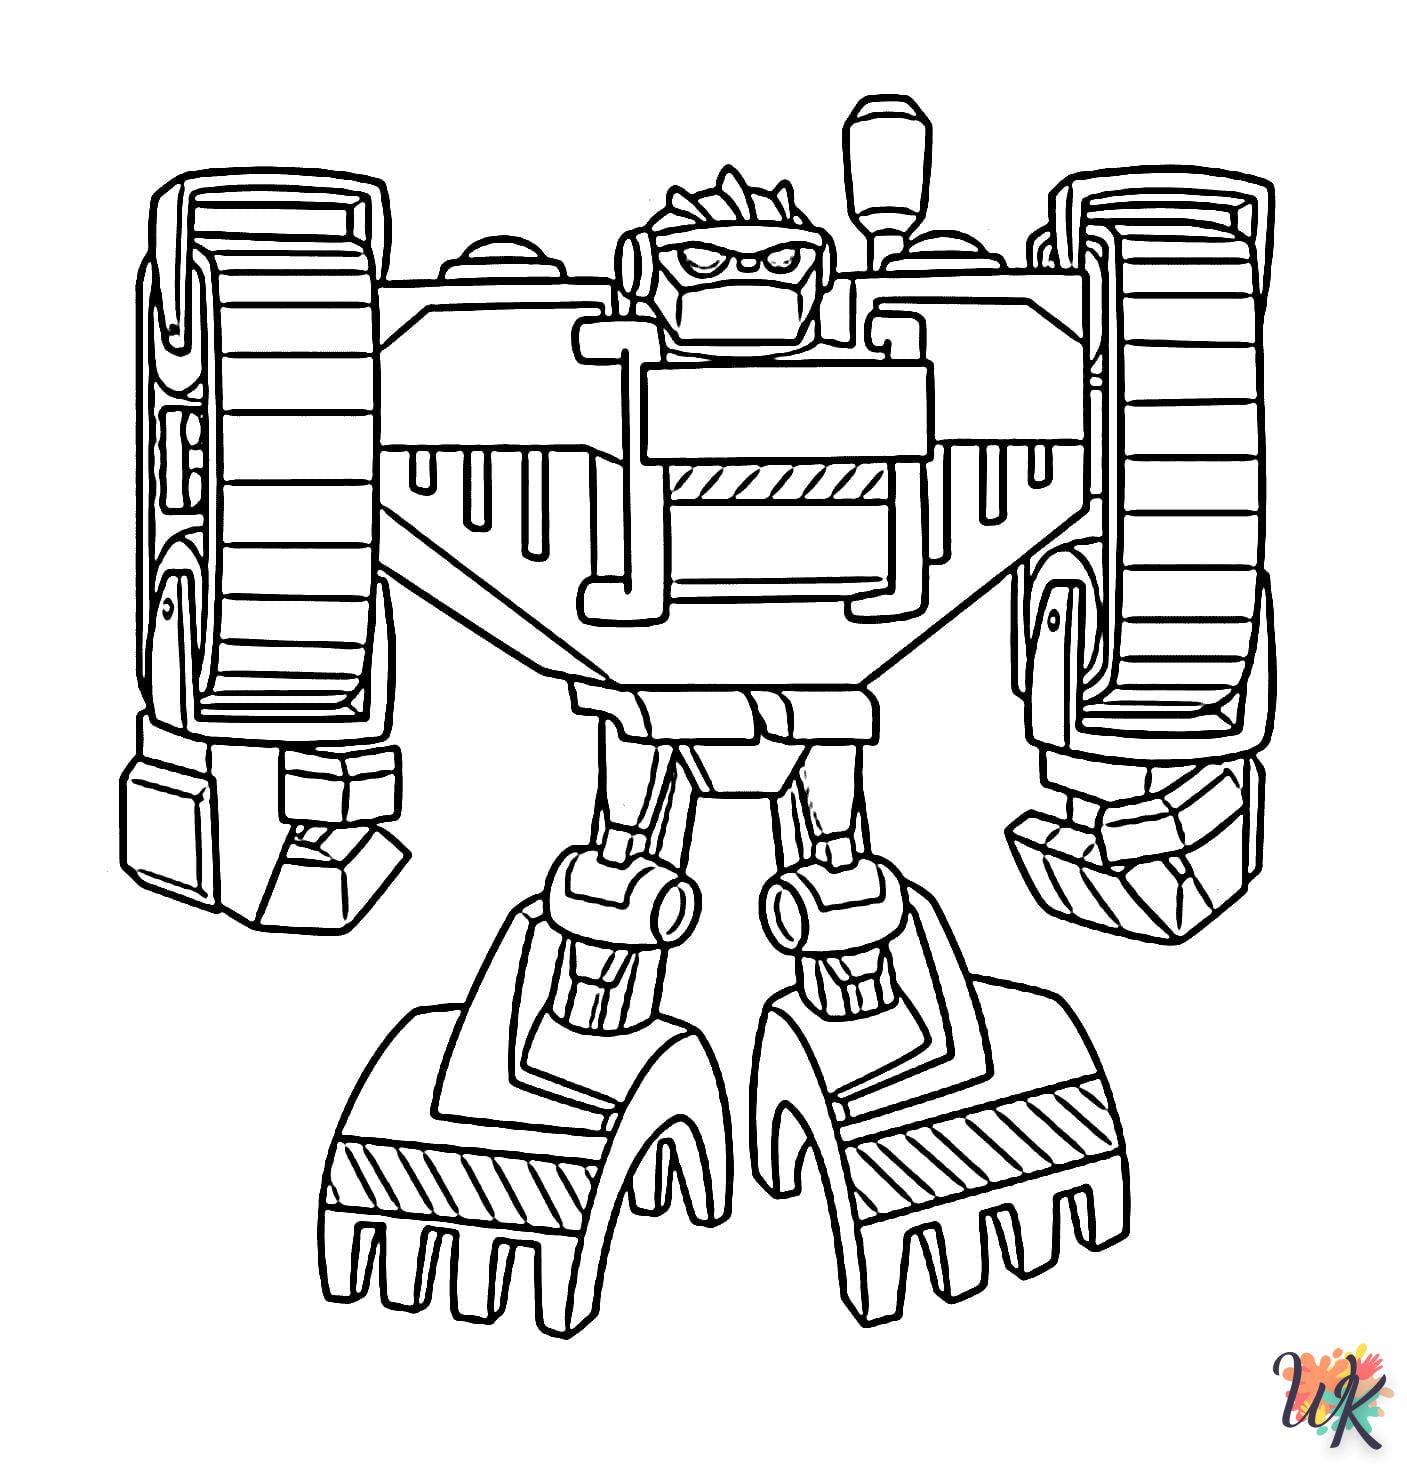 Robot coloring page for children aged 5 to print 1